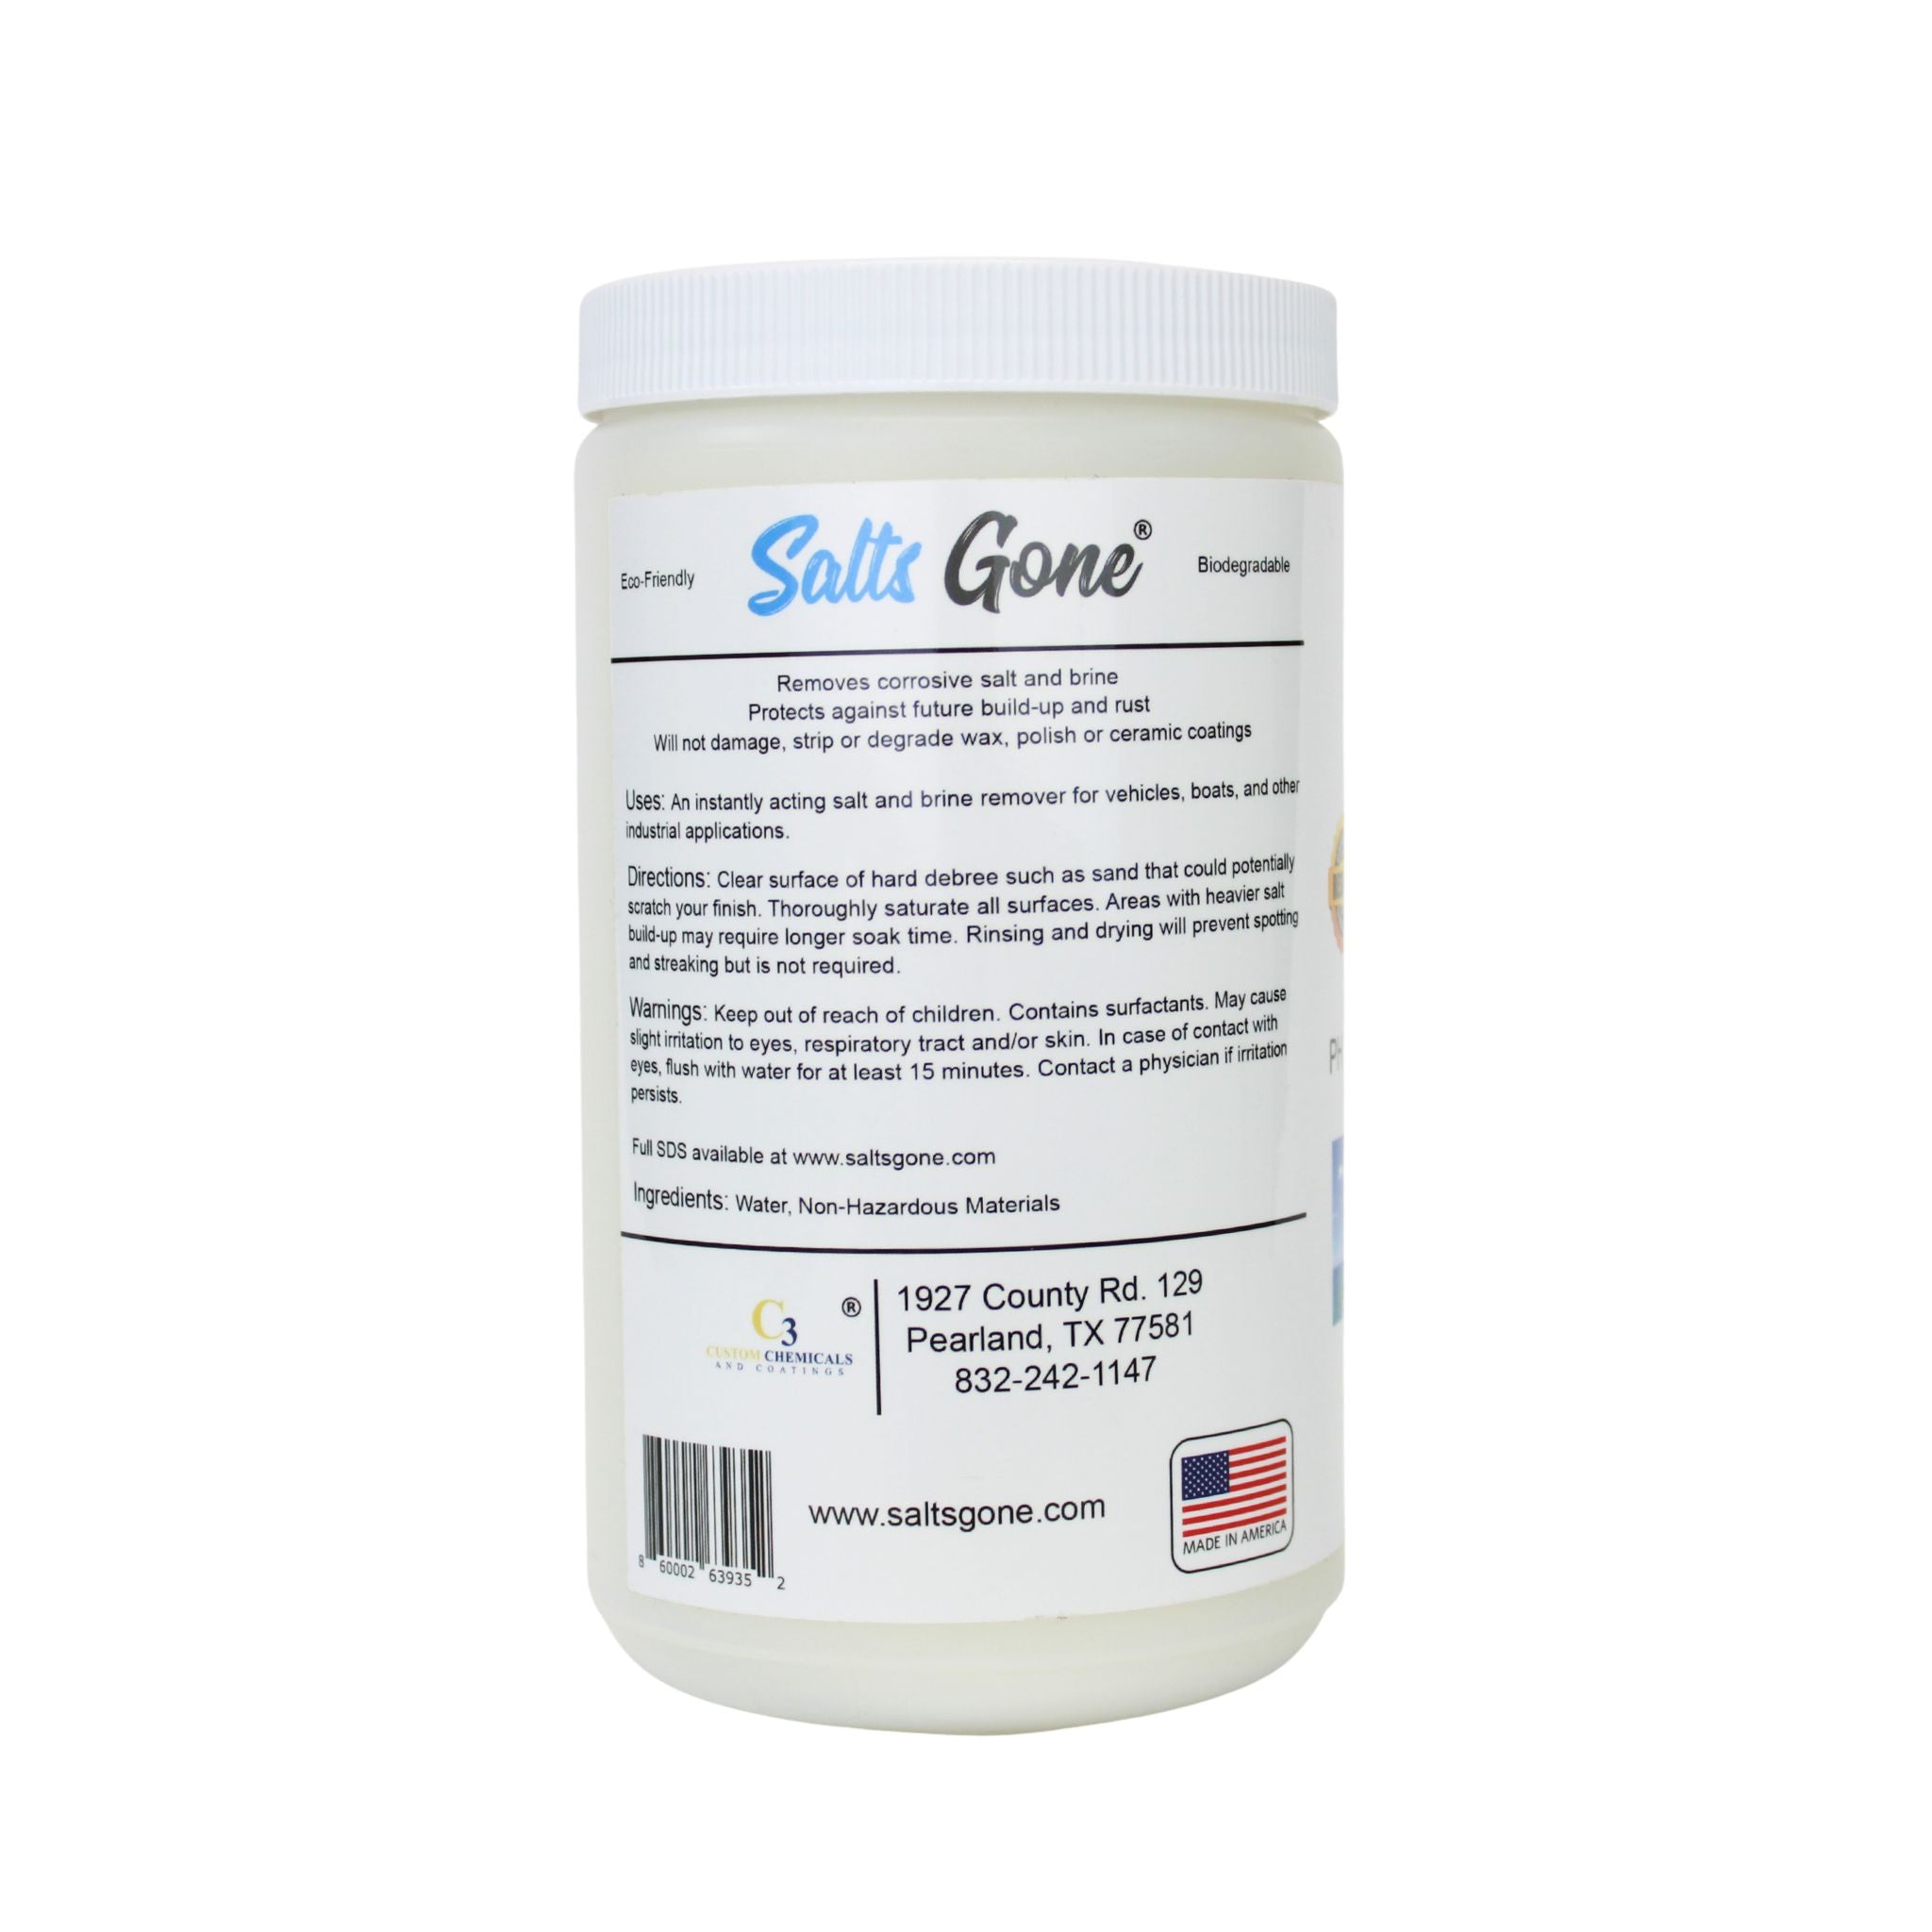 Salts Gone Concentrate – Marine Detail Supply Port Clinton